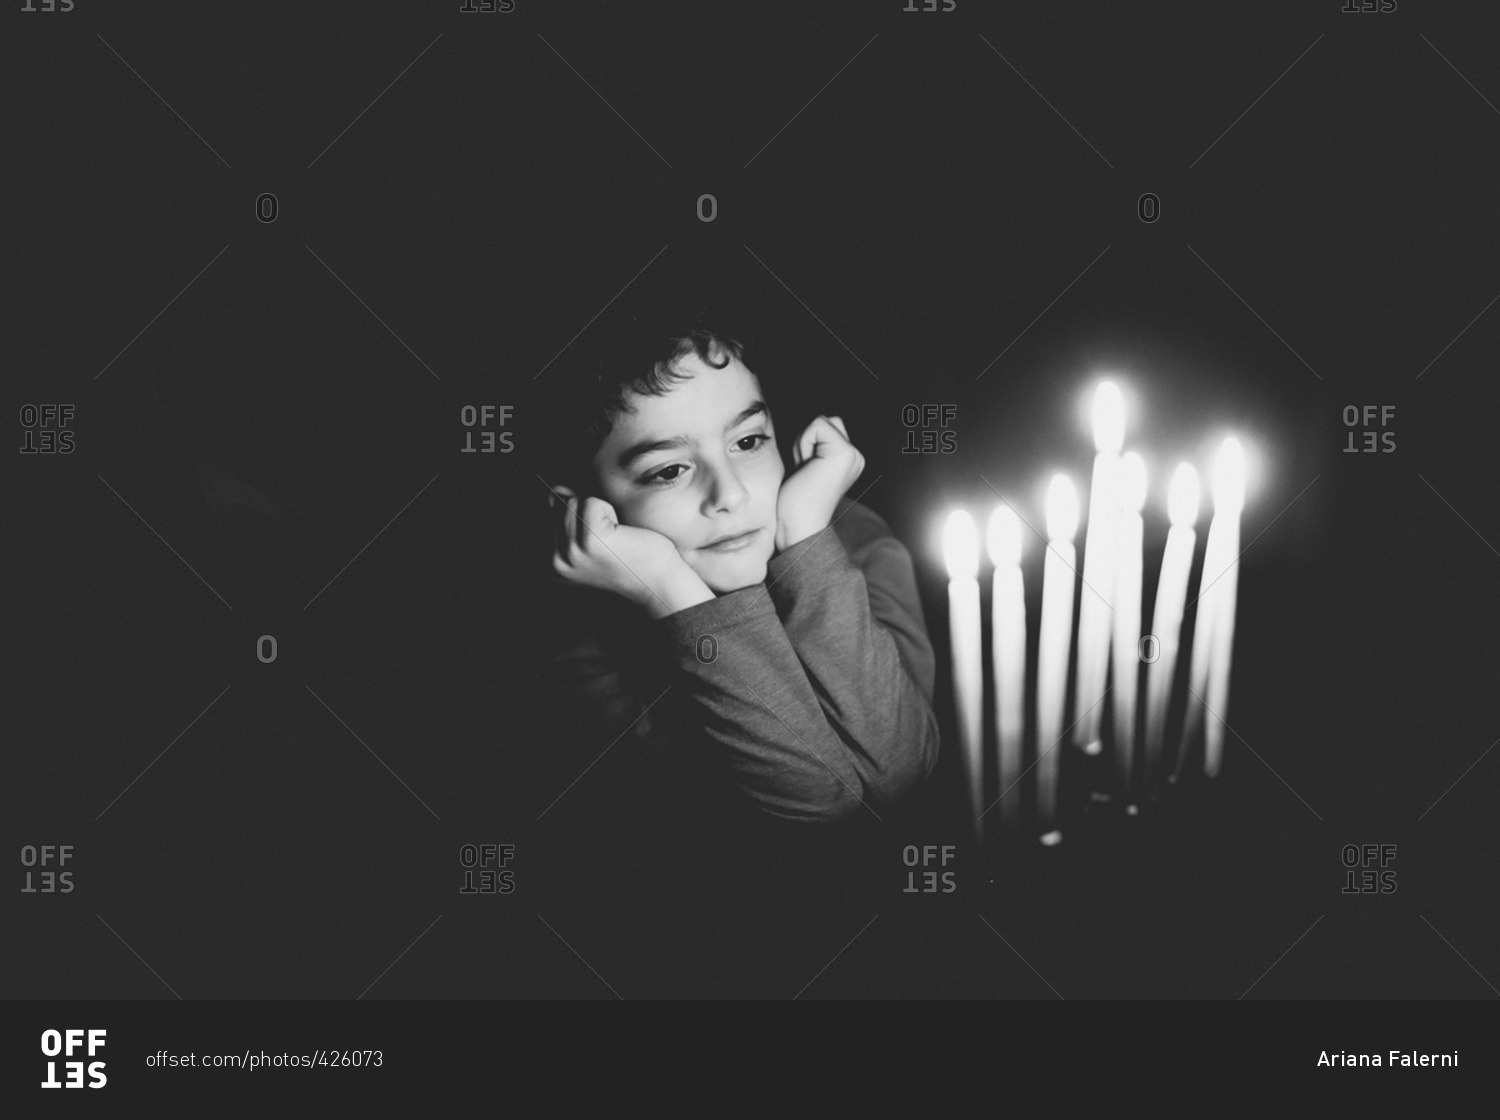 Young boy sitting at table with candles lit in menorah